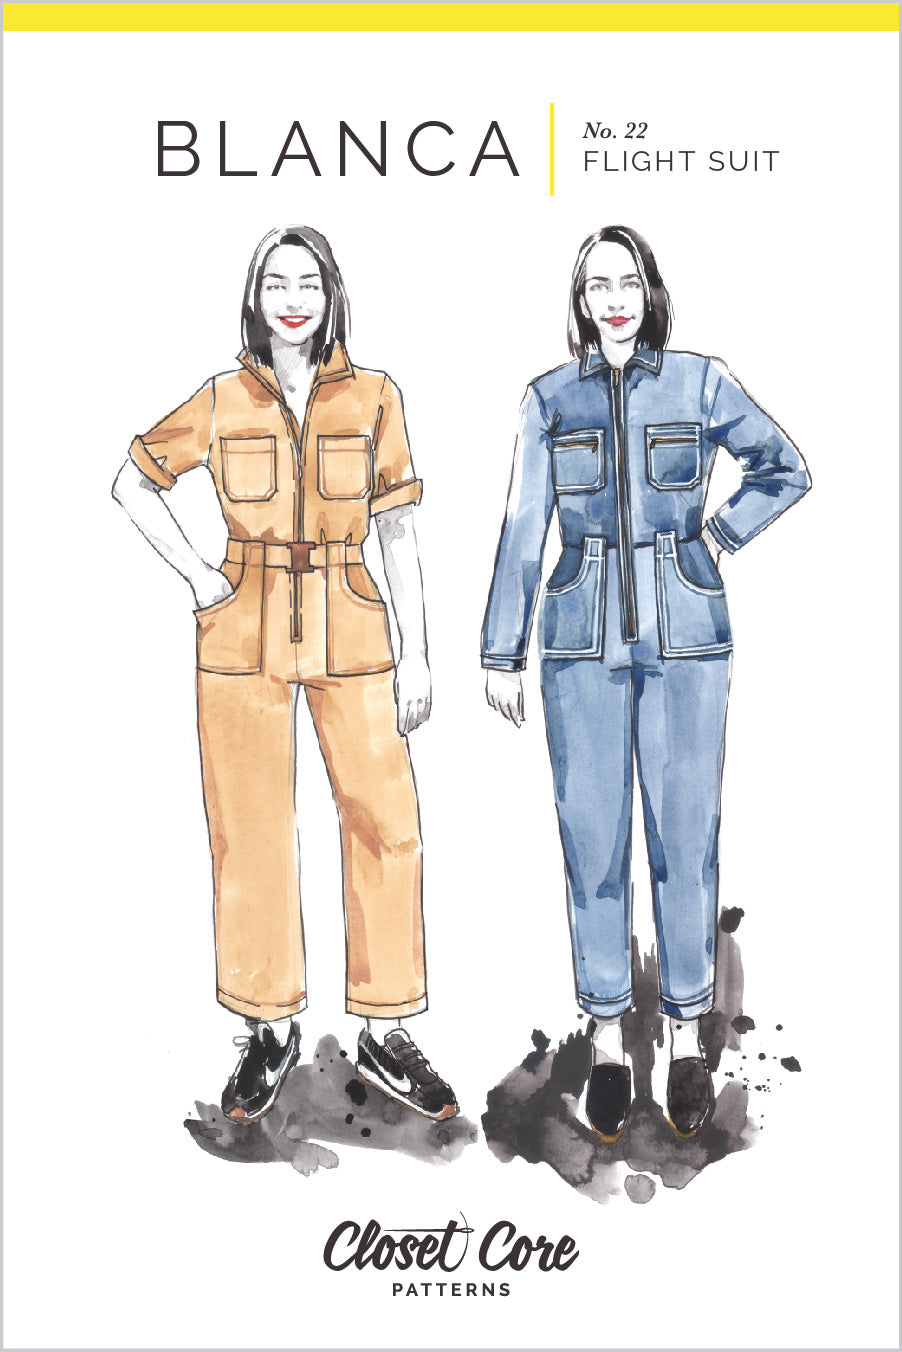 Blanca Flight Suit Sewing Pattern by Closet Core